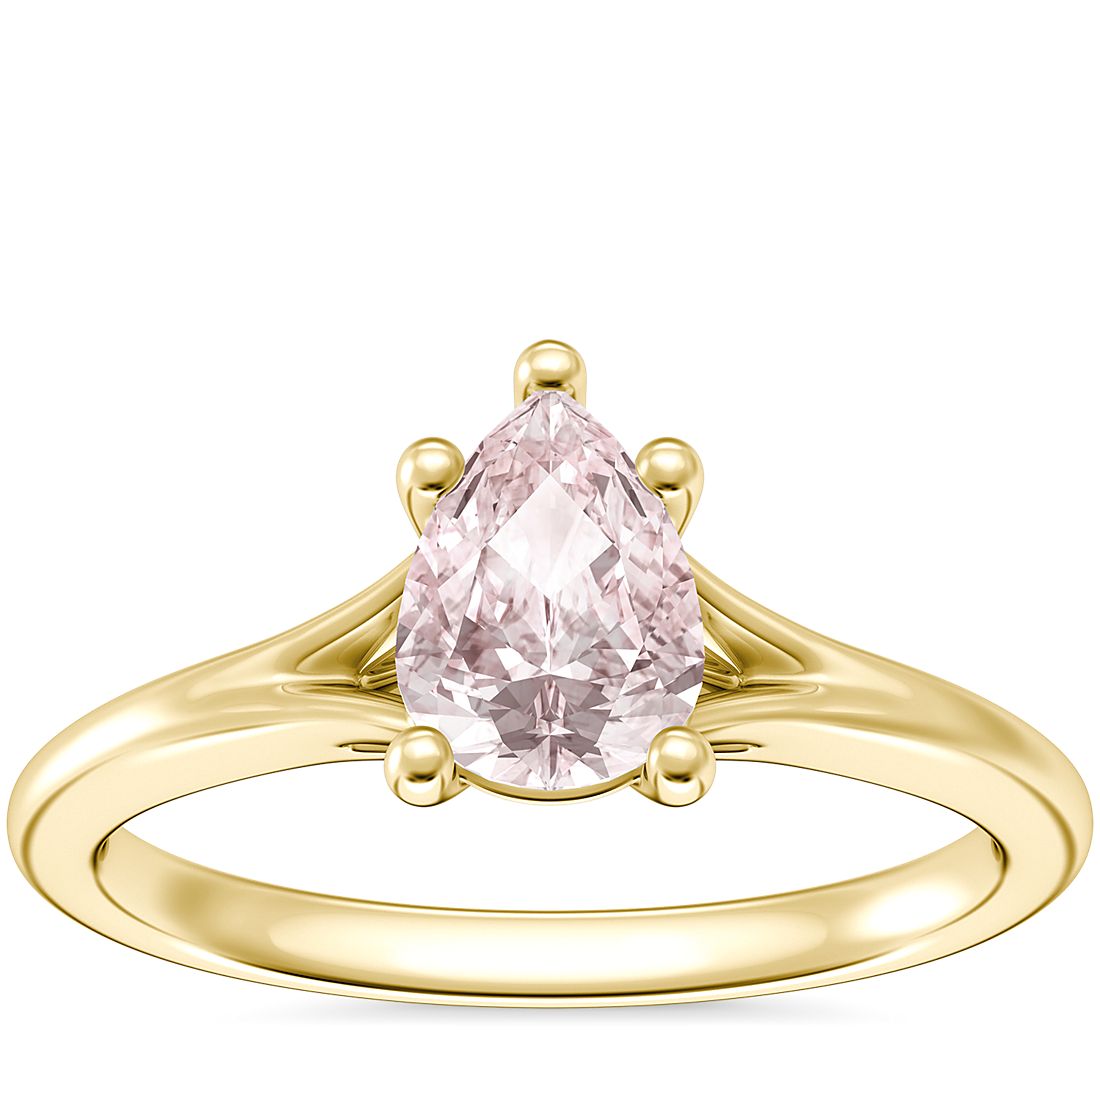 Petite Split Shank Solitaire Engagement Ring with Pear-Shaped Morganite in 18k Yellow Gold (7x5mm)